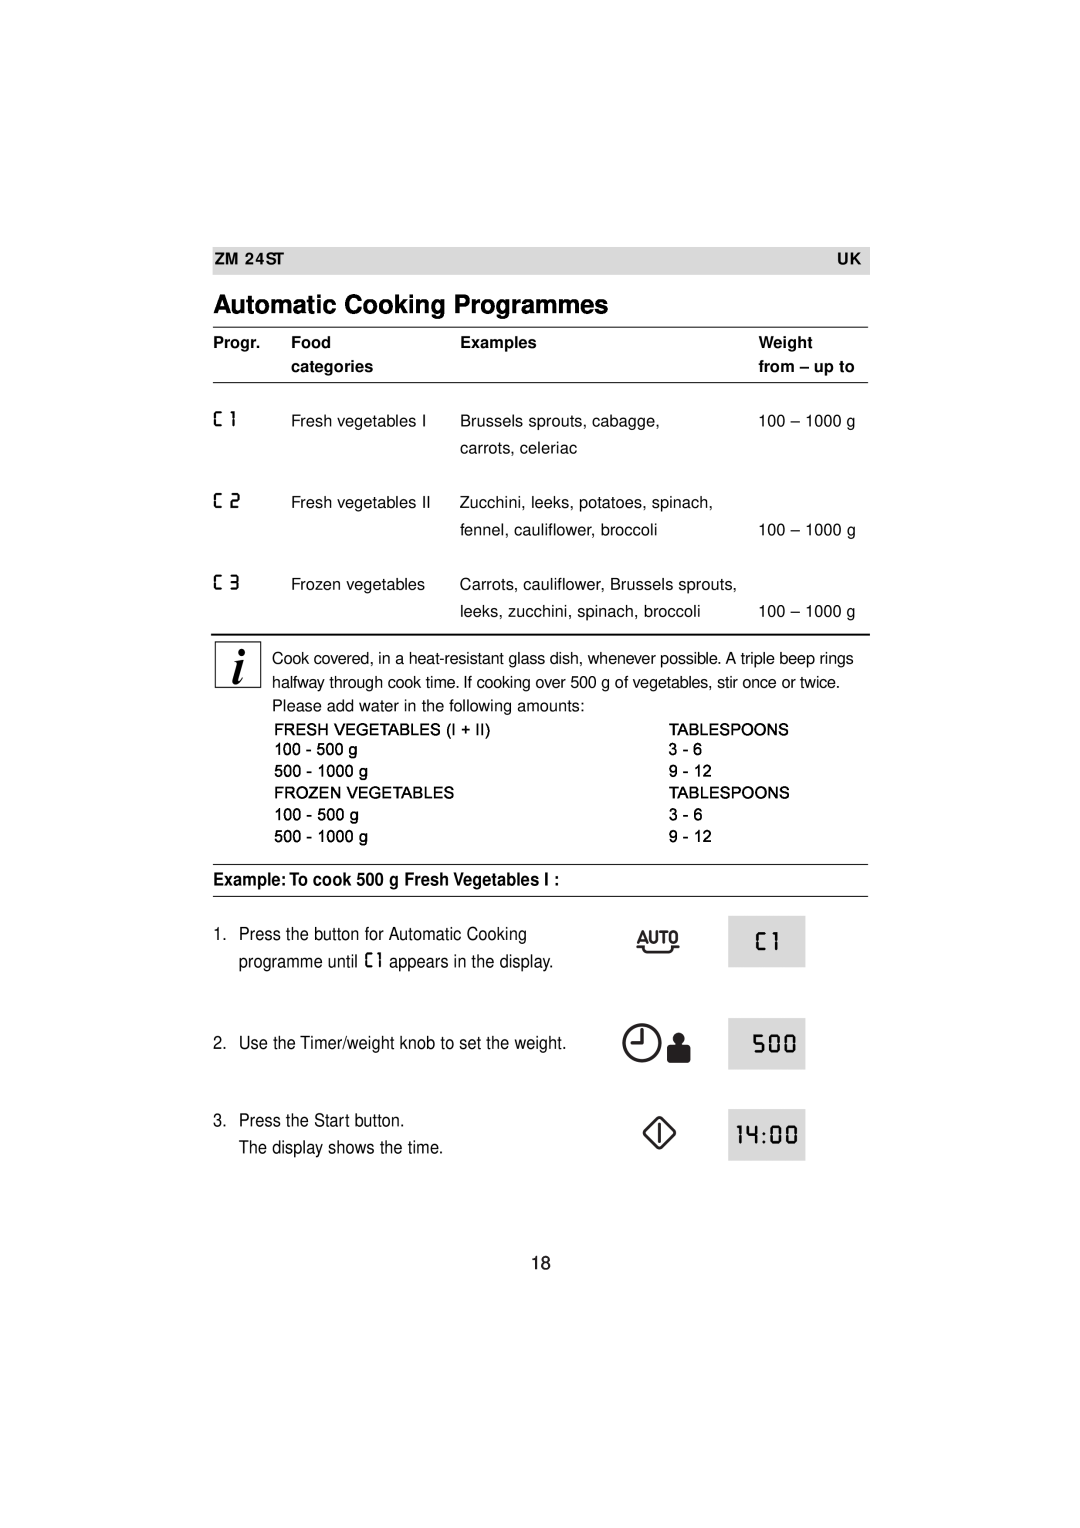 Zanussi ZM 24ST Automatic Cooking Programmes, C 5, Example To cook 500 g Fresh Vegetables, Food, Examples, Weight 